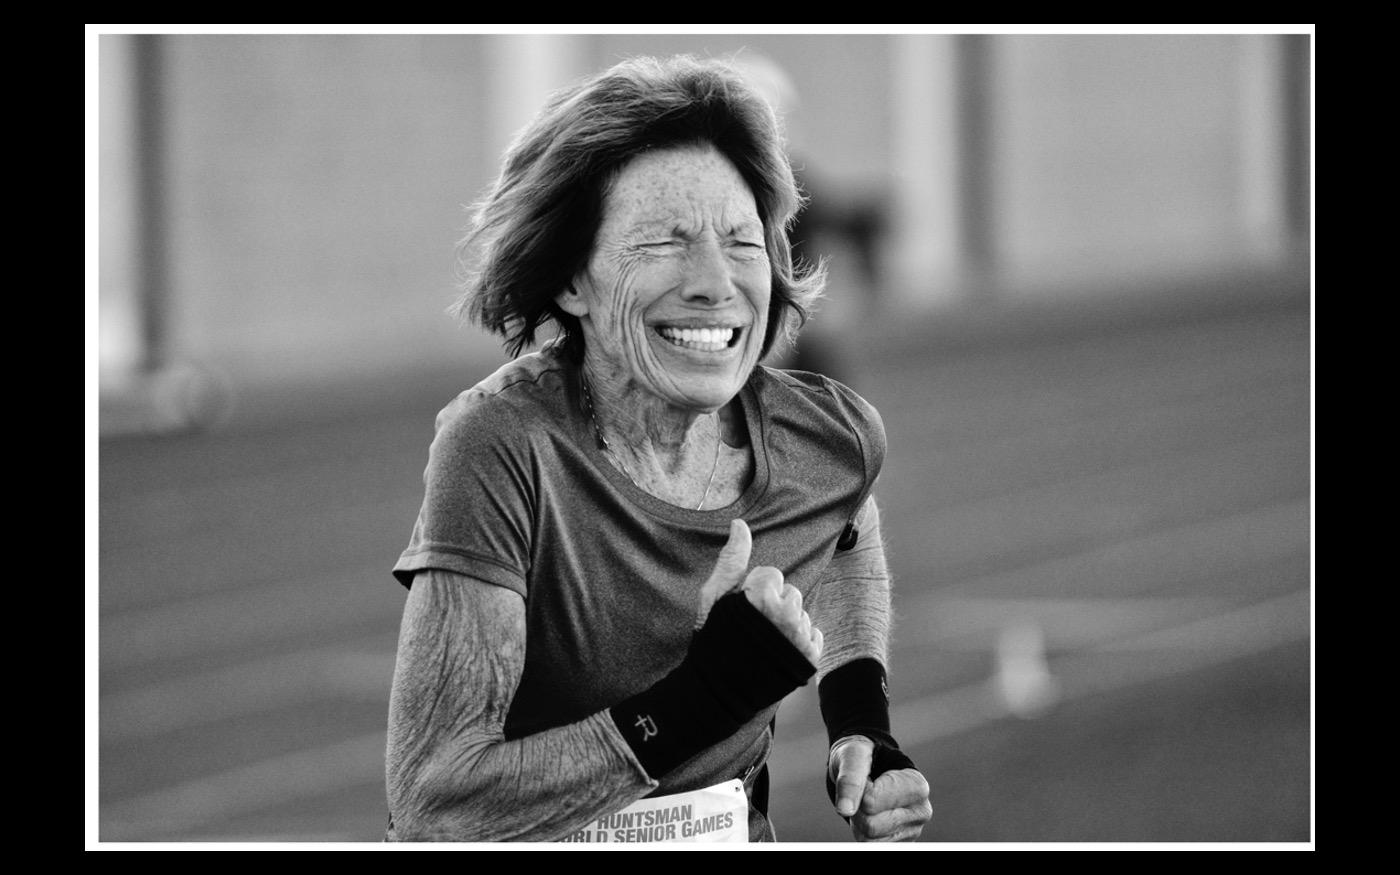 Race Walking is a big event at the Huntsman World Senior Games in Utah each autumn 2019 : Looking Back: 60 Years of Photographs : David Burnett | Photographer